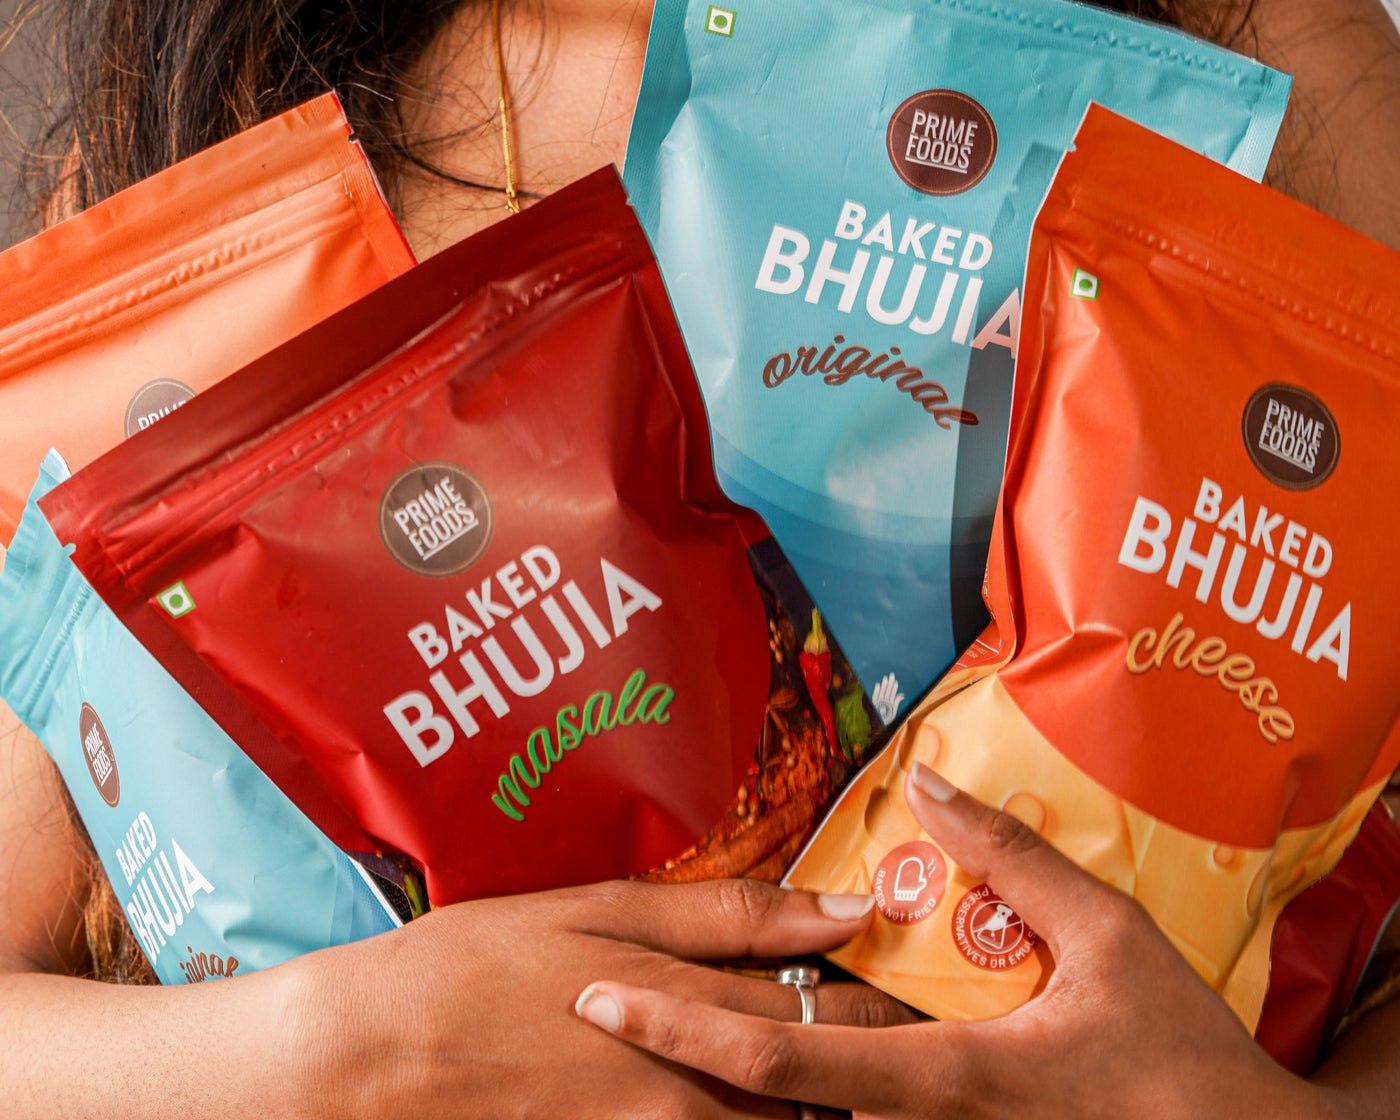 Baked Bhujia Assorted (30g) (Set of 6) (6x30g)